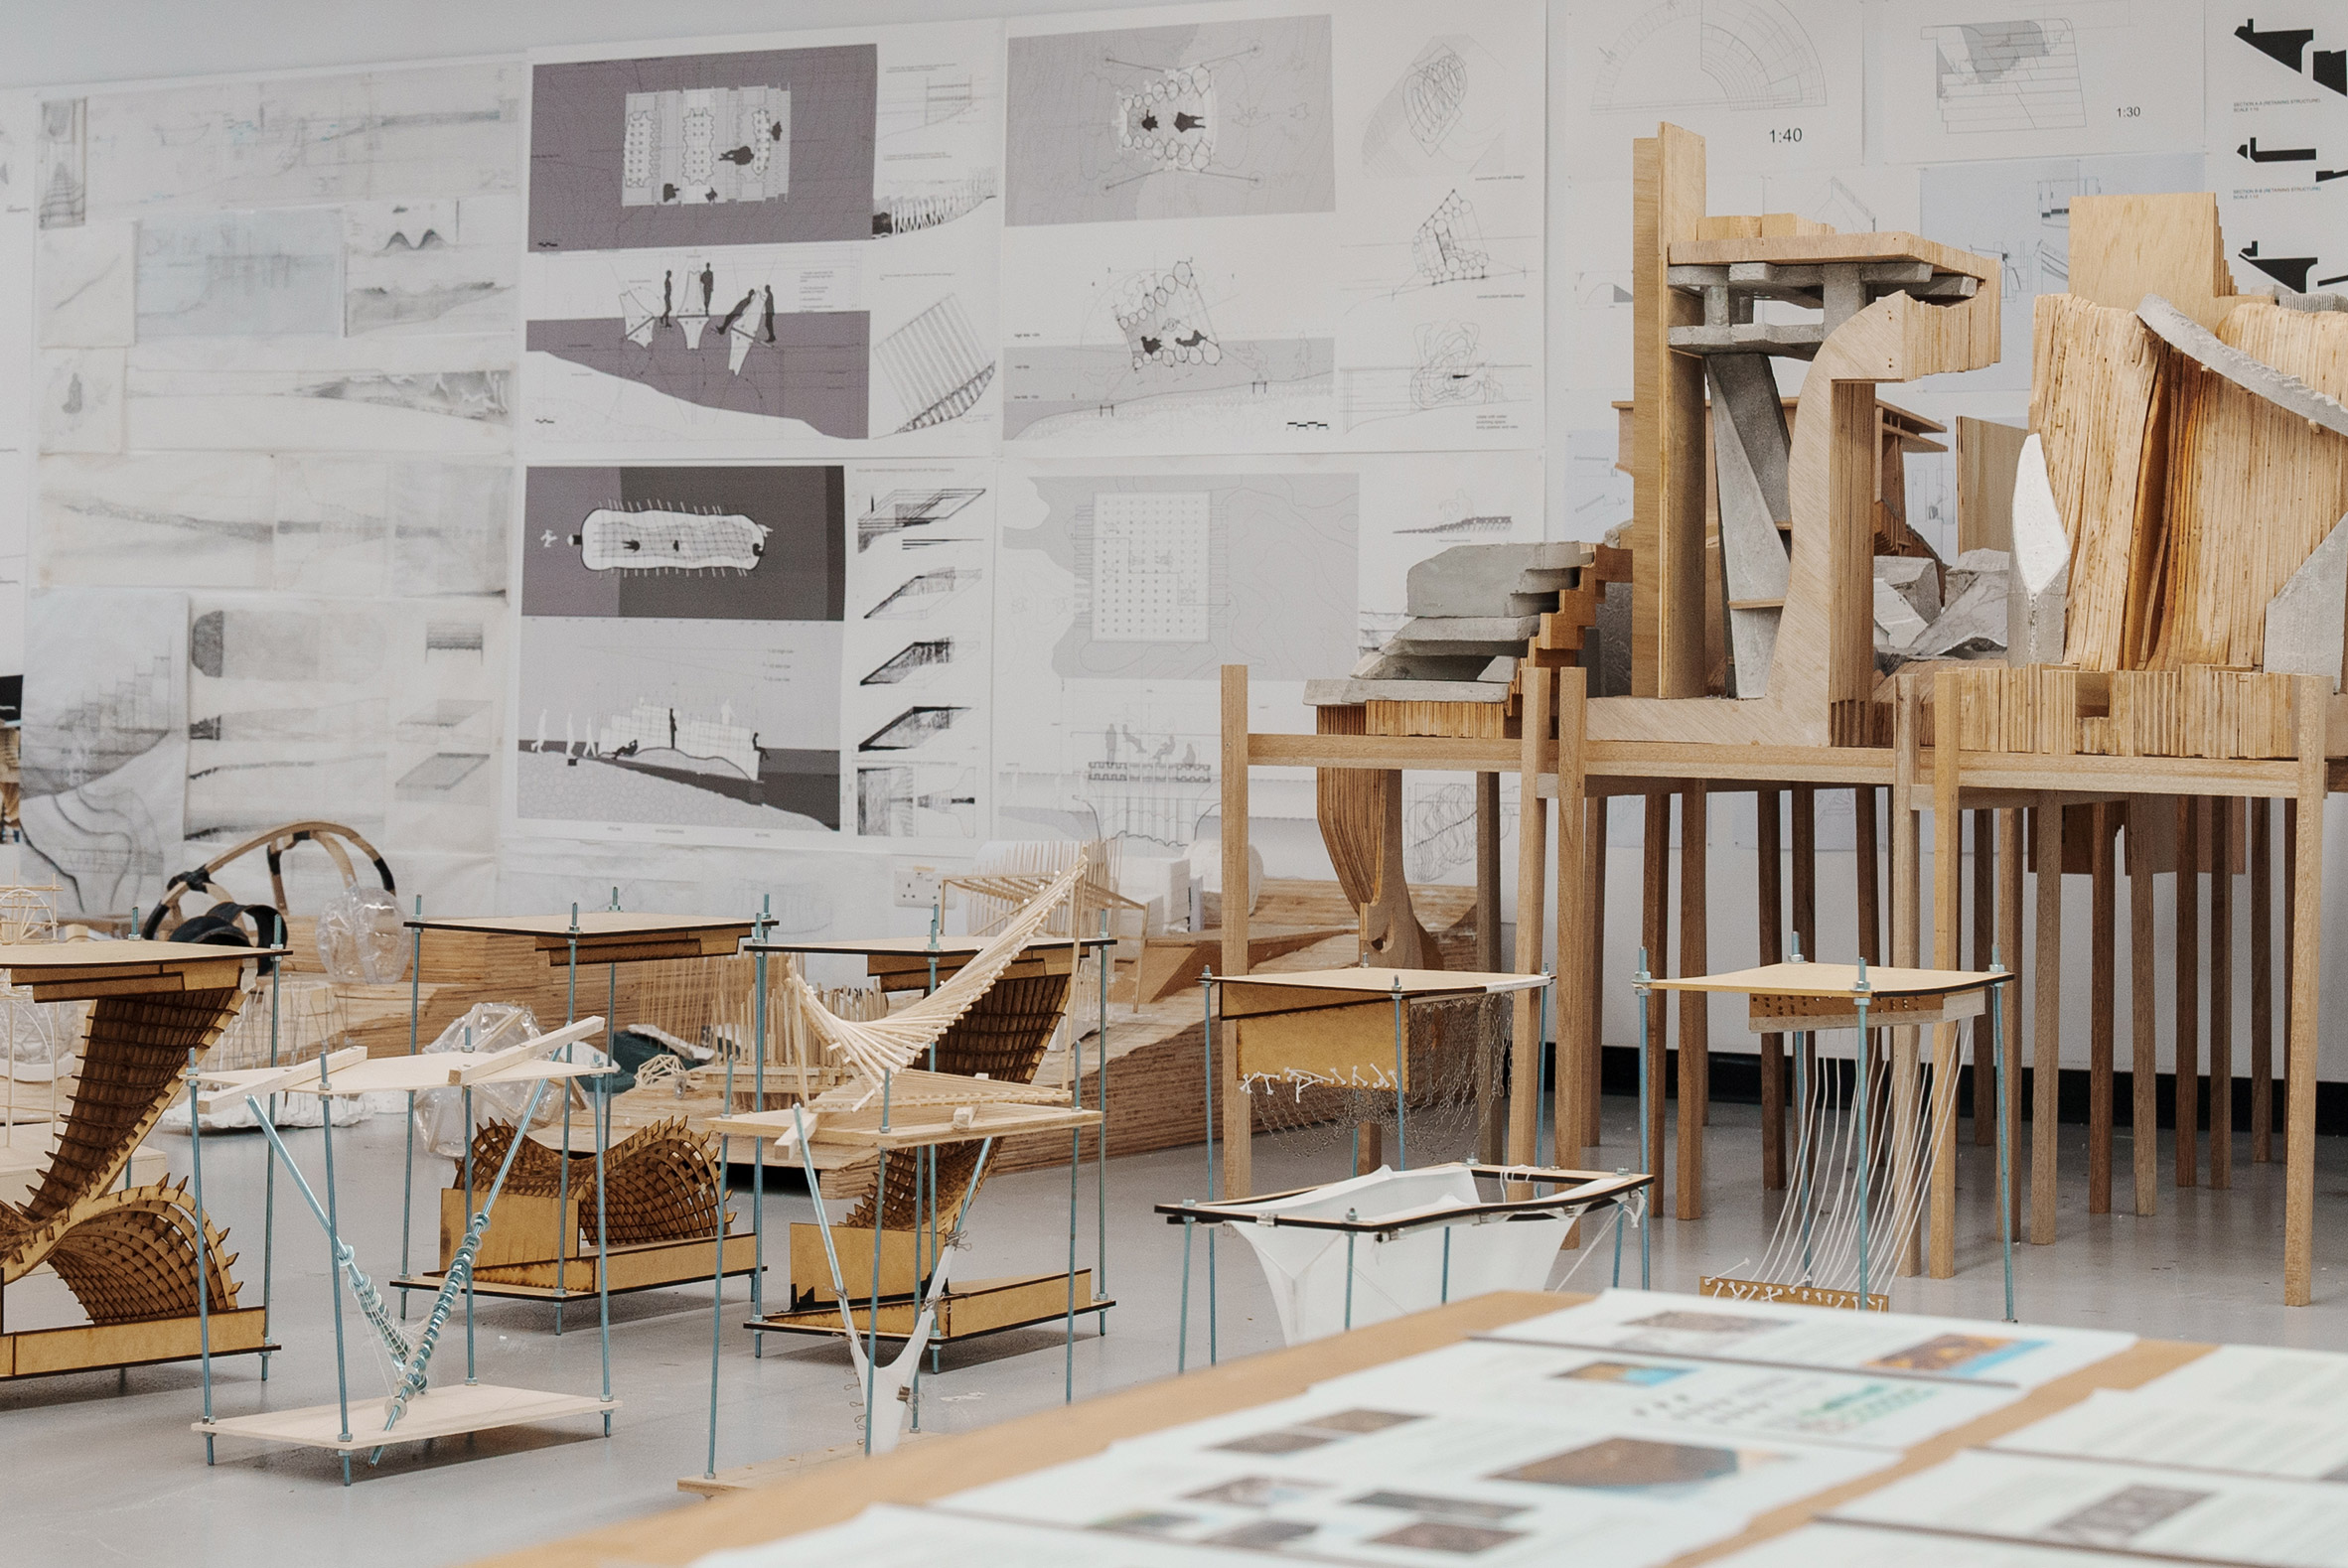 A studio space with models on floor and drawings on walls